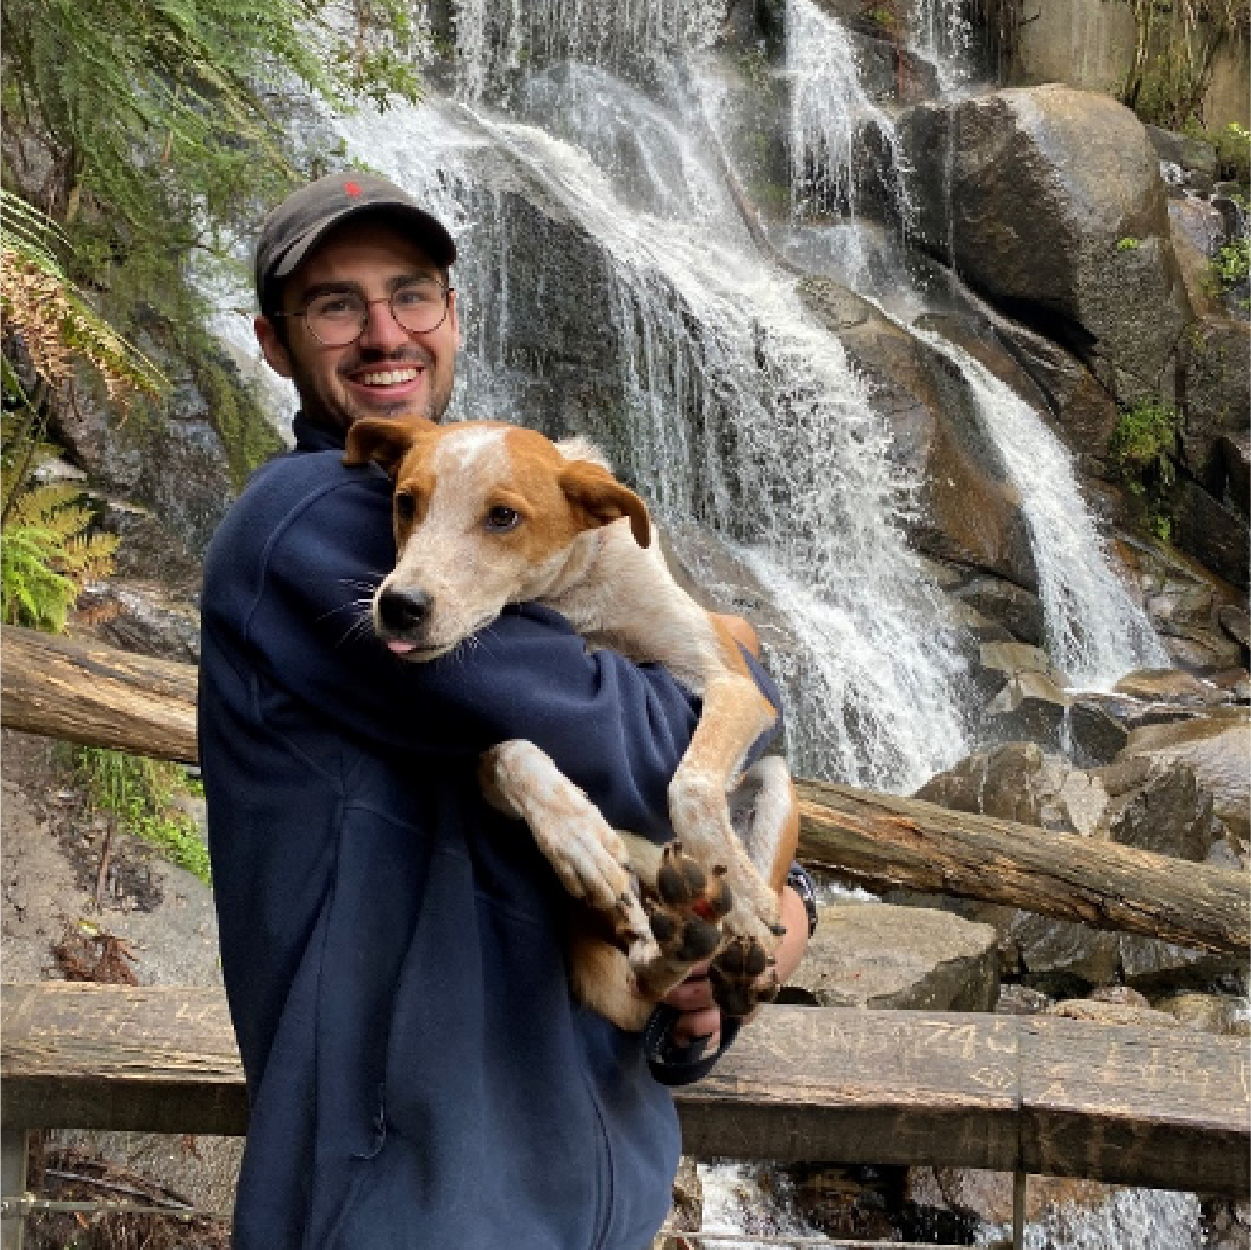 PARC Swim teacher Lachlan holding his dog in front of a waterfall